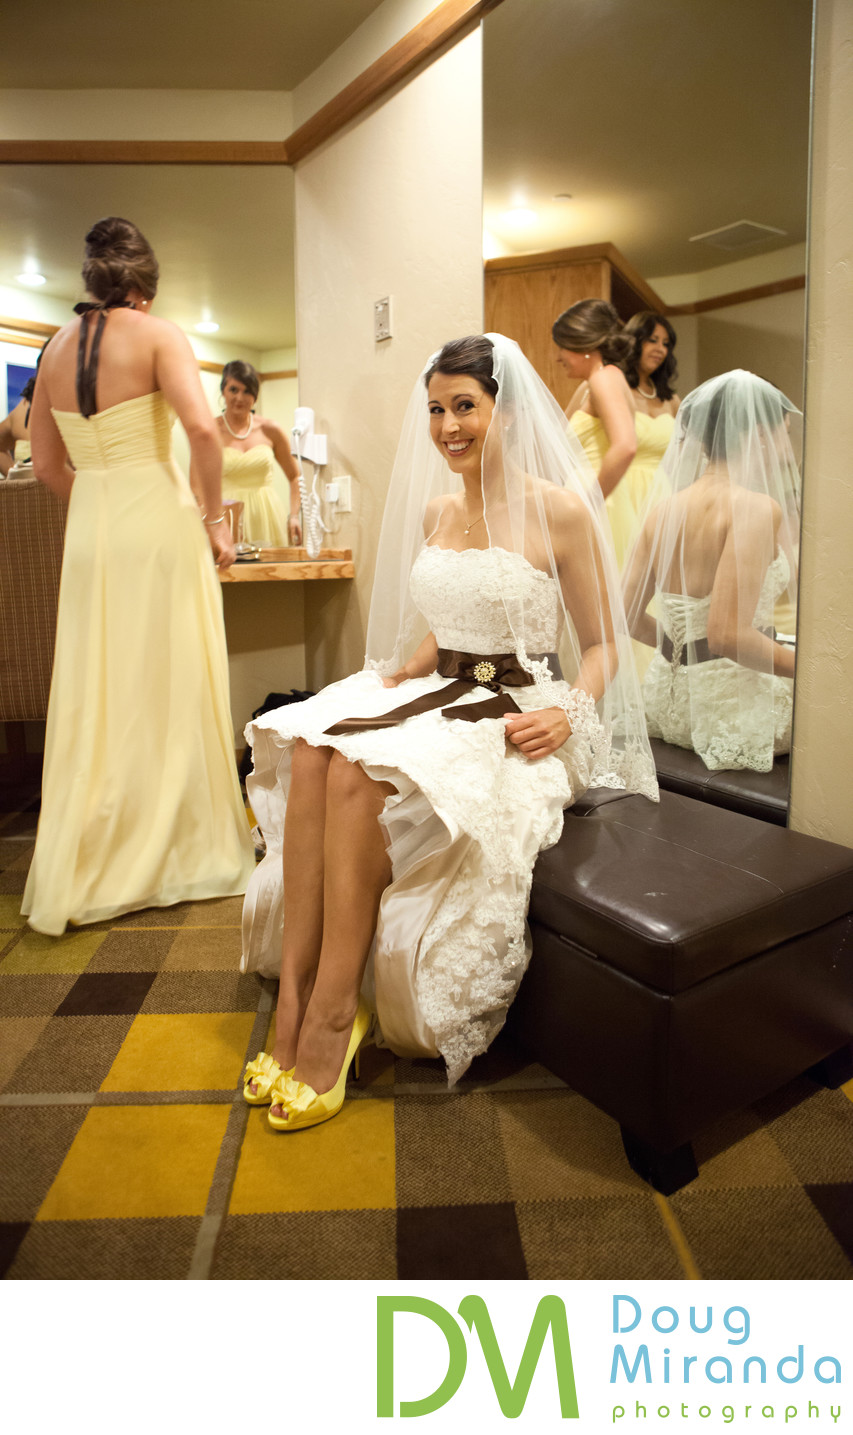 Bride Getting Ready Pictures at Edgewood Tahoe Wedding